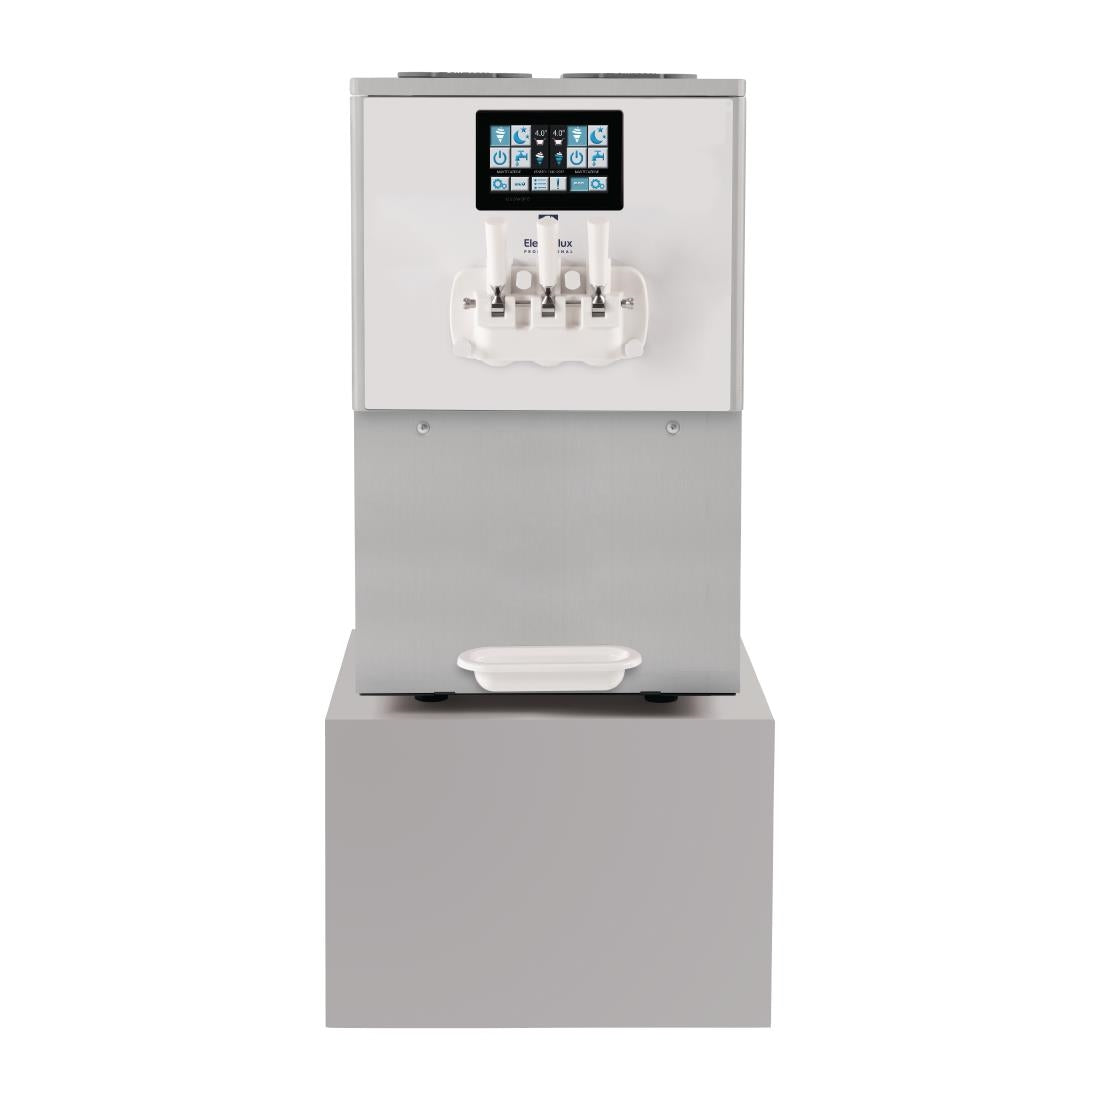 FT903 Electrolux Countertop Soft Ice Cream Dispenser 2x8Ltr JD Catering Equipment Solutions Ltd